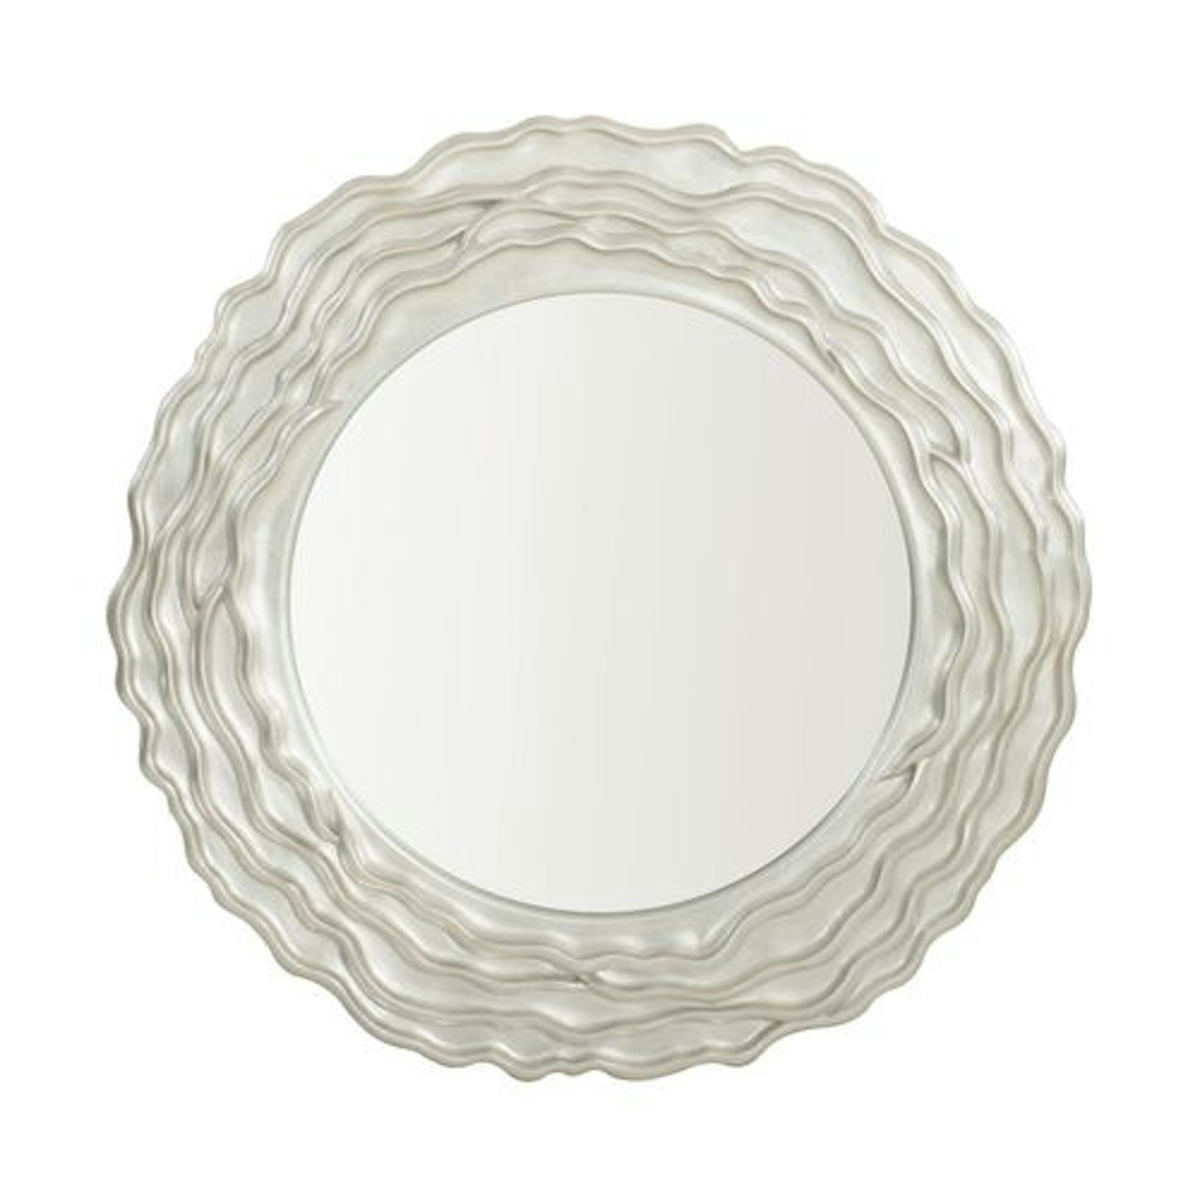 Calista Round Mirror - 9 Best Statement Wall Mirrors To Hang In Your Home - LuxDeco.com